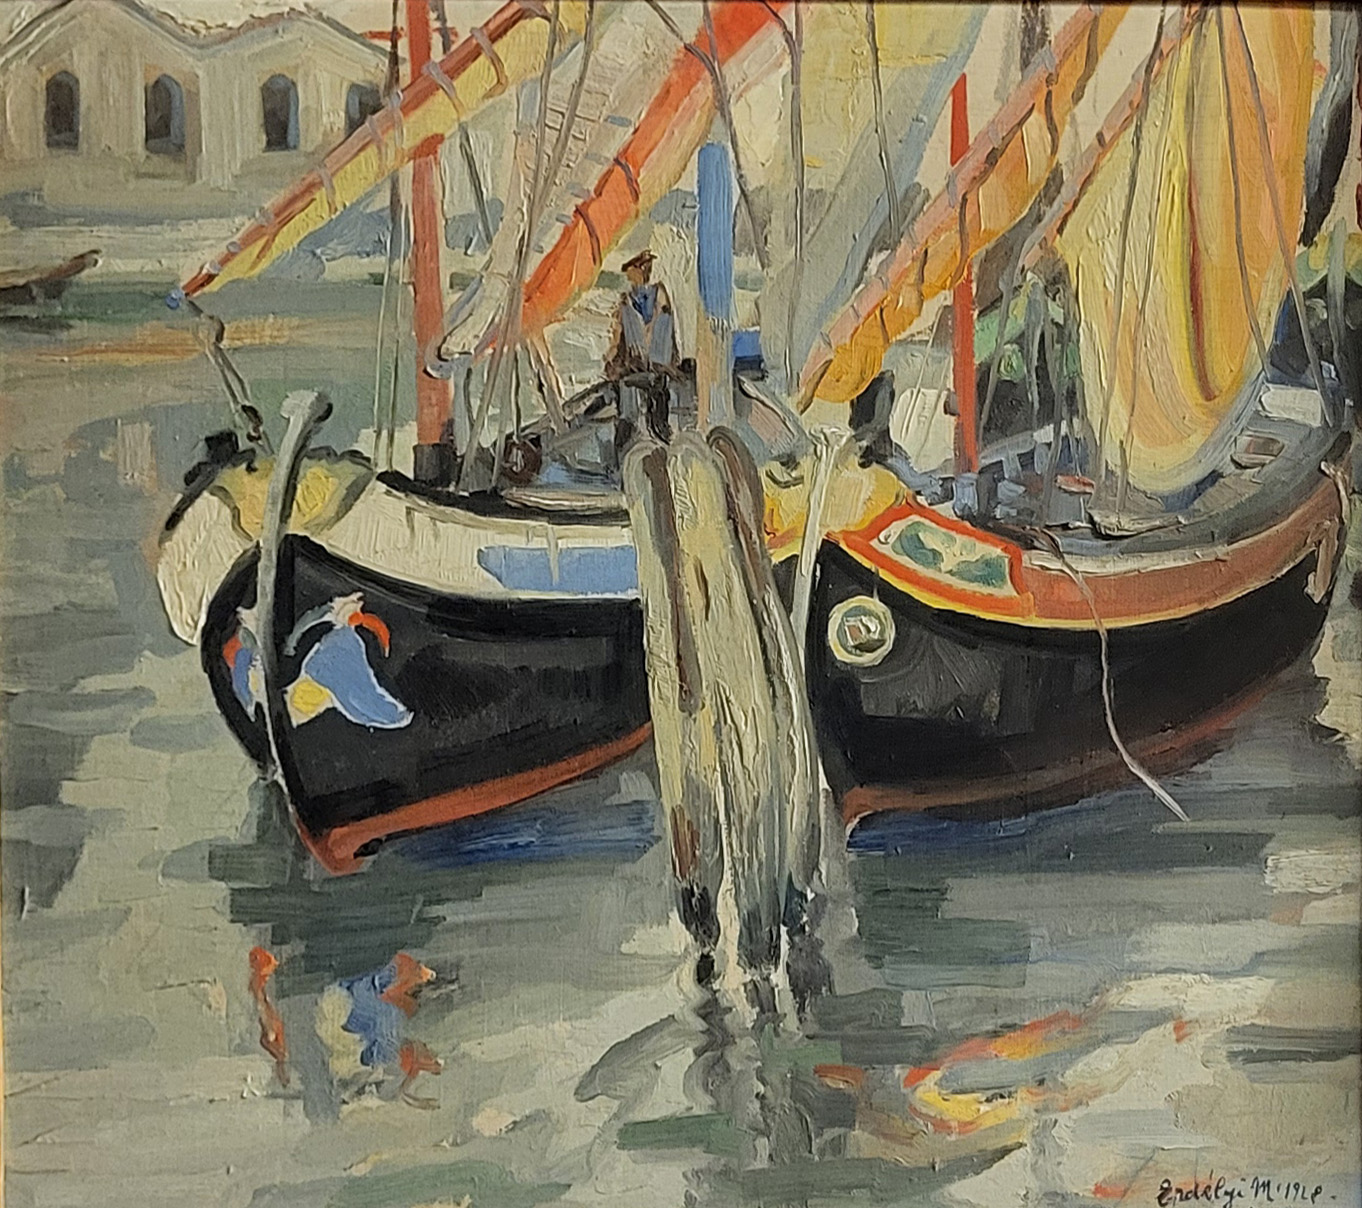 MIHALY ERDELYI, 1894 - 1972, HUNGARIAN, OIL ON BOARD Fishing boats at Chioggia, Venice, signed,